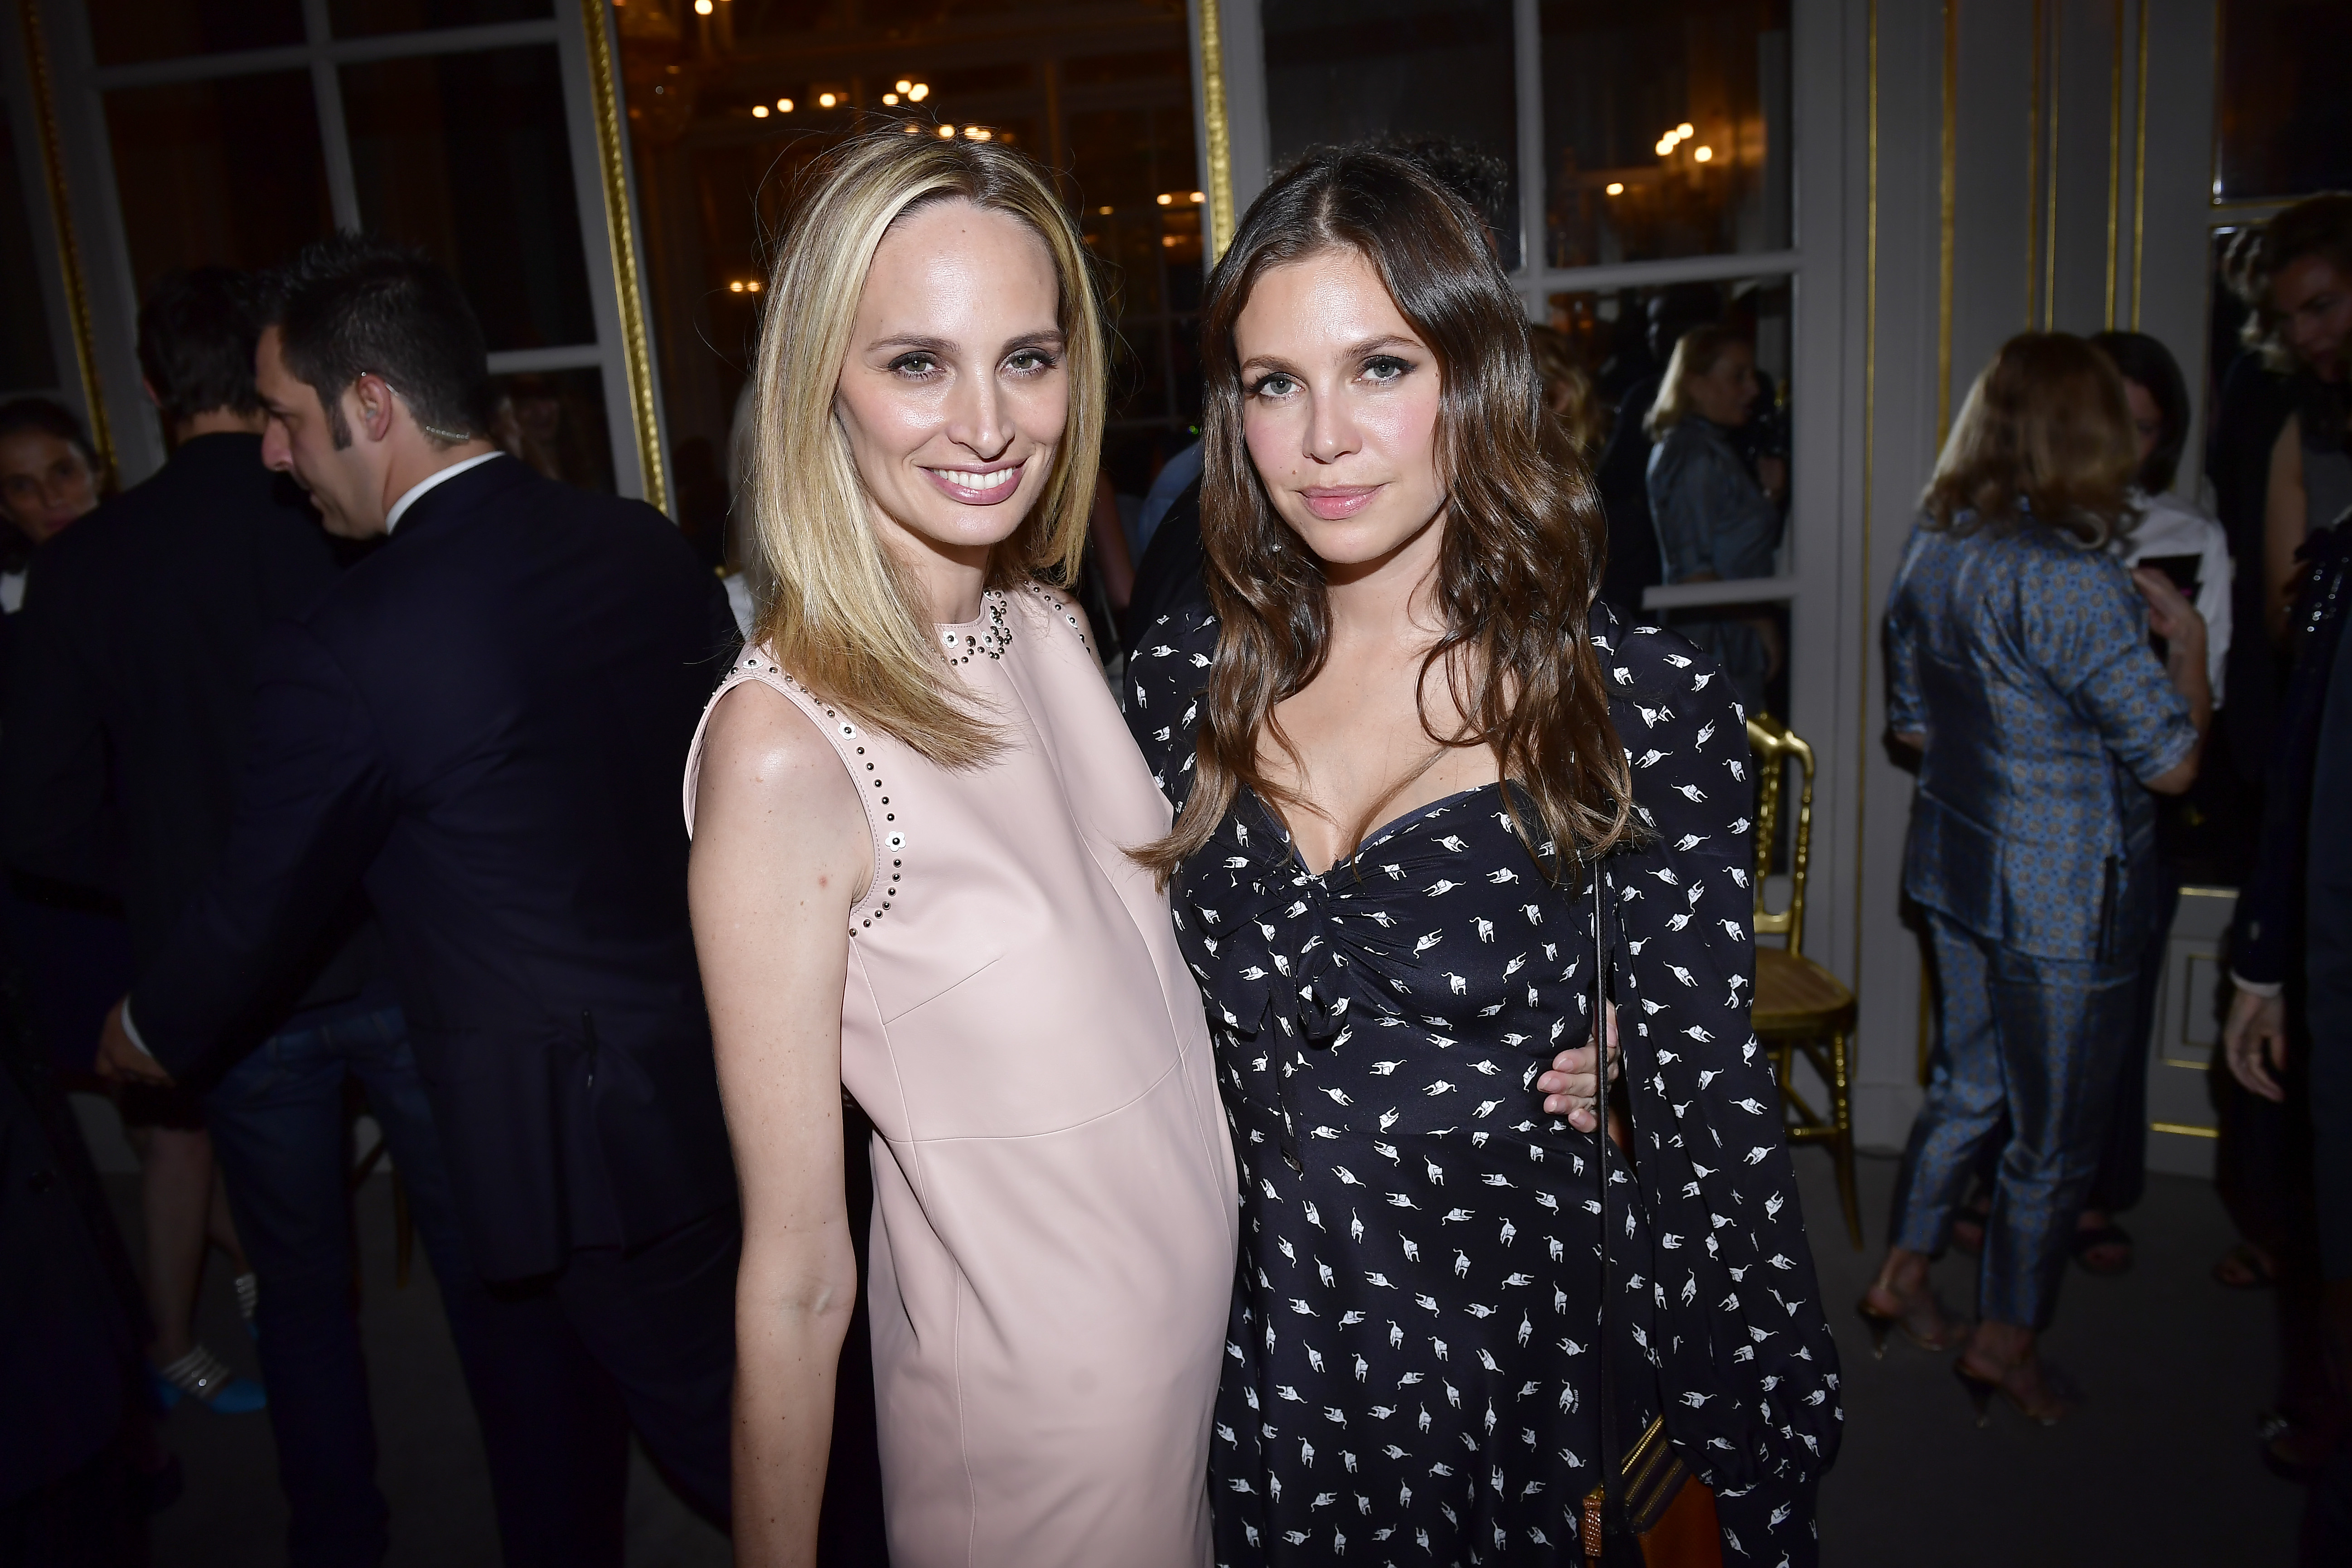 PARIS, FRANCE - JULY 02:  Lauren Santo Domingo and Dasha Zhukova attend Miu Miu Cruise Collection cocktail & party as part of Haute Couture Paris Fashion Week on July 2, 2017 in Paris, France.  (Photo by Victor Boyko/Getty Images for Miu Miu) *** Local Caption *** Lauren Santo Domingo,Dasha Zhukova